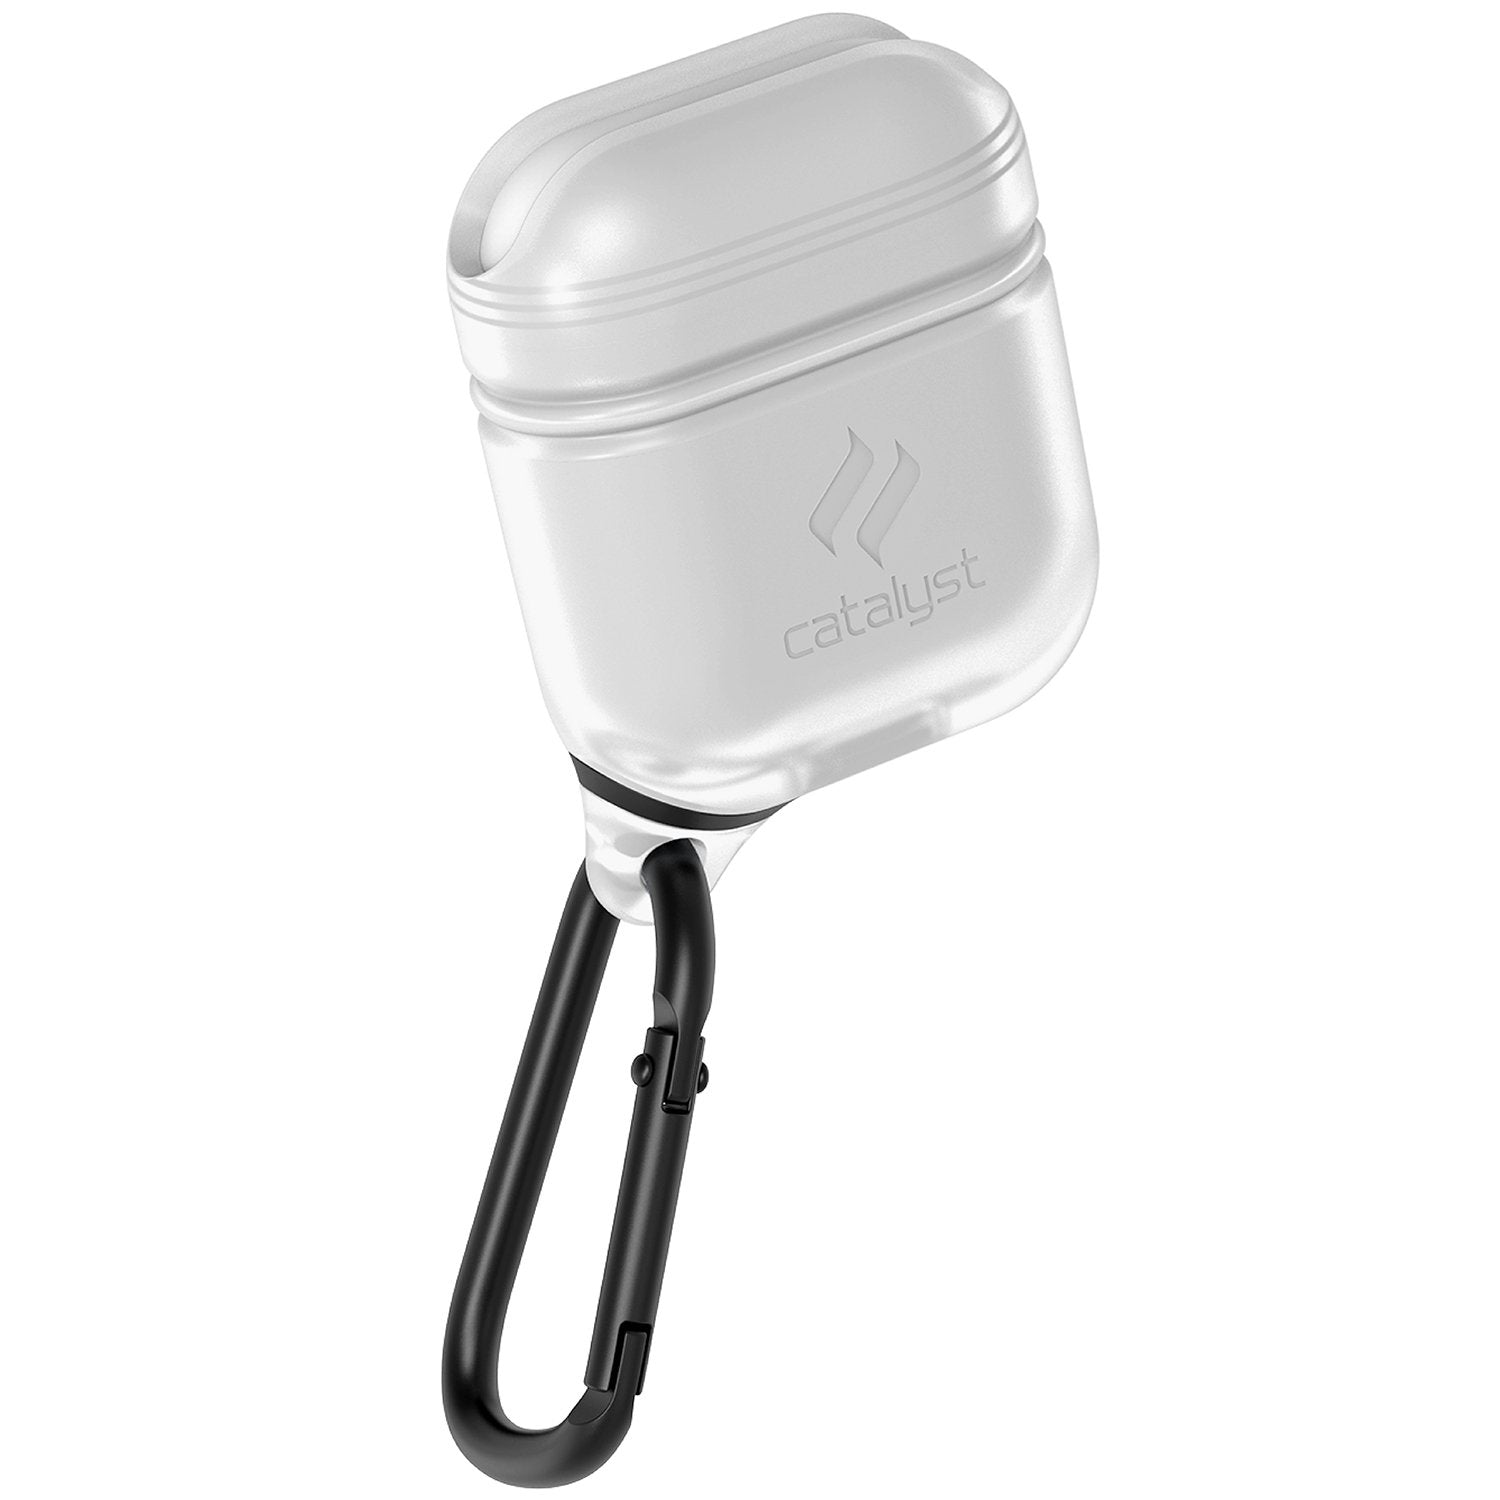 CATAPDWHT | Waterproof Case for AirPods